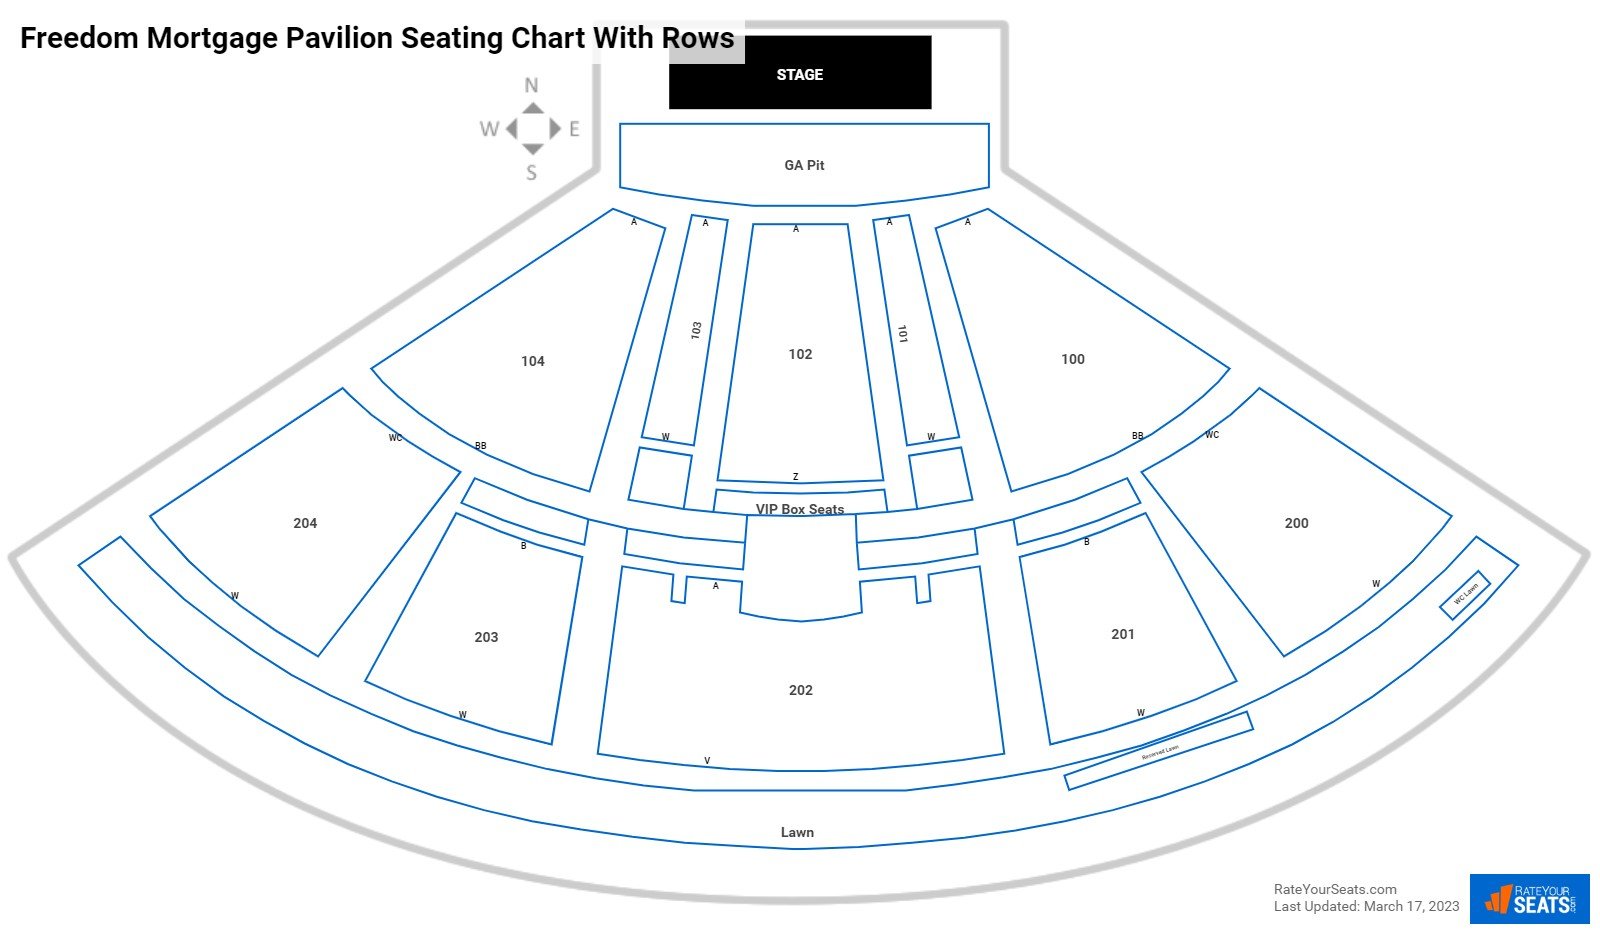 Waterfront Music Pavilion seating chart with row numbers